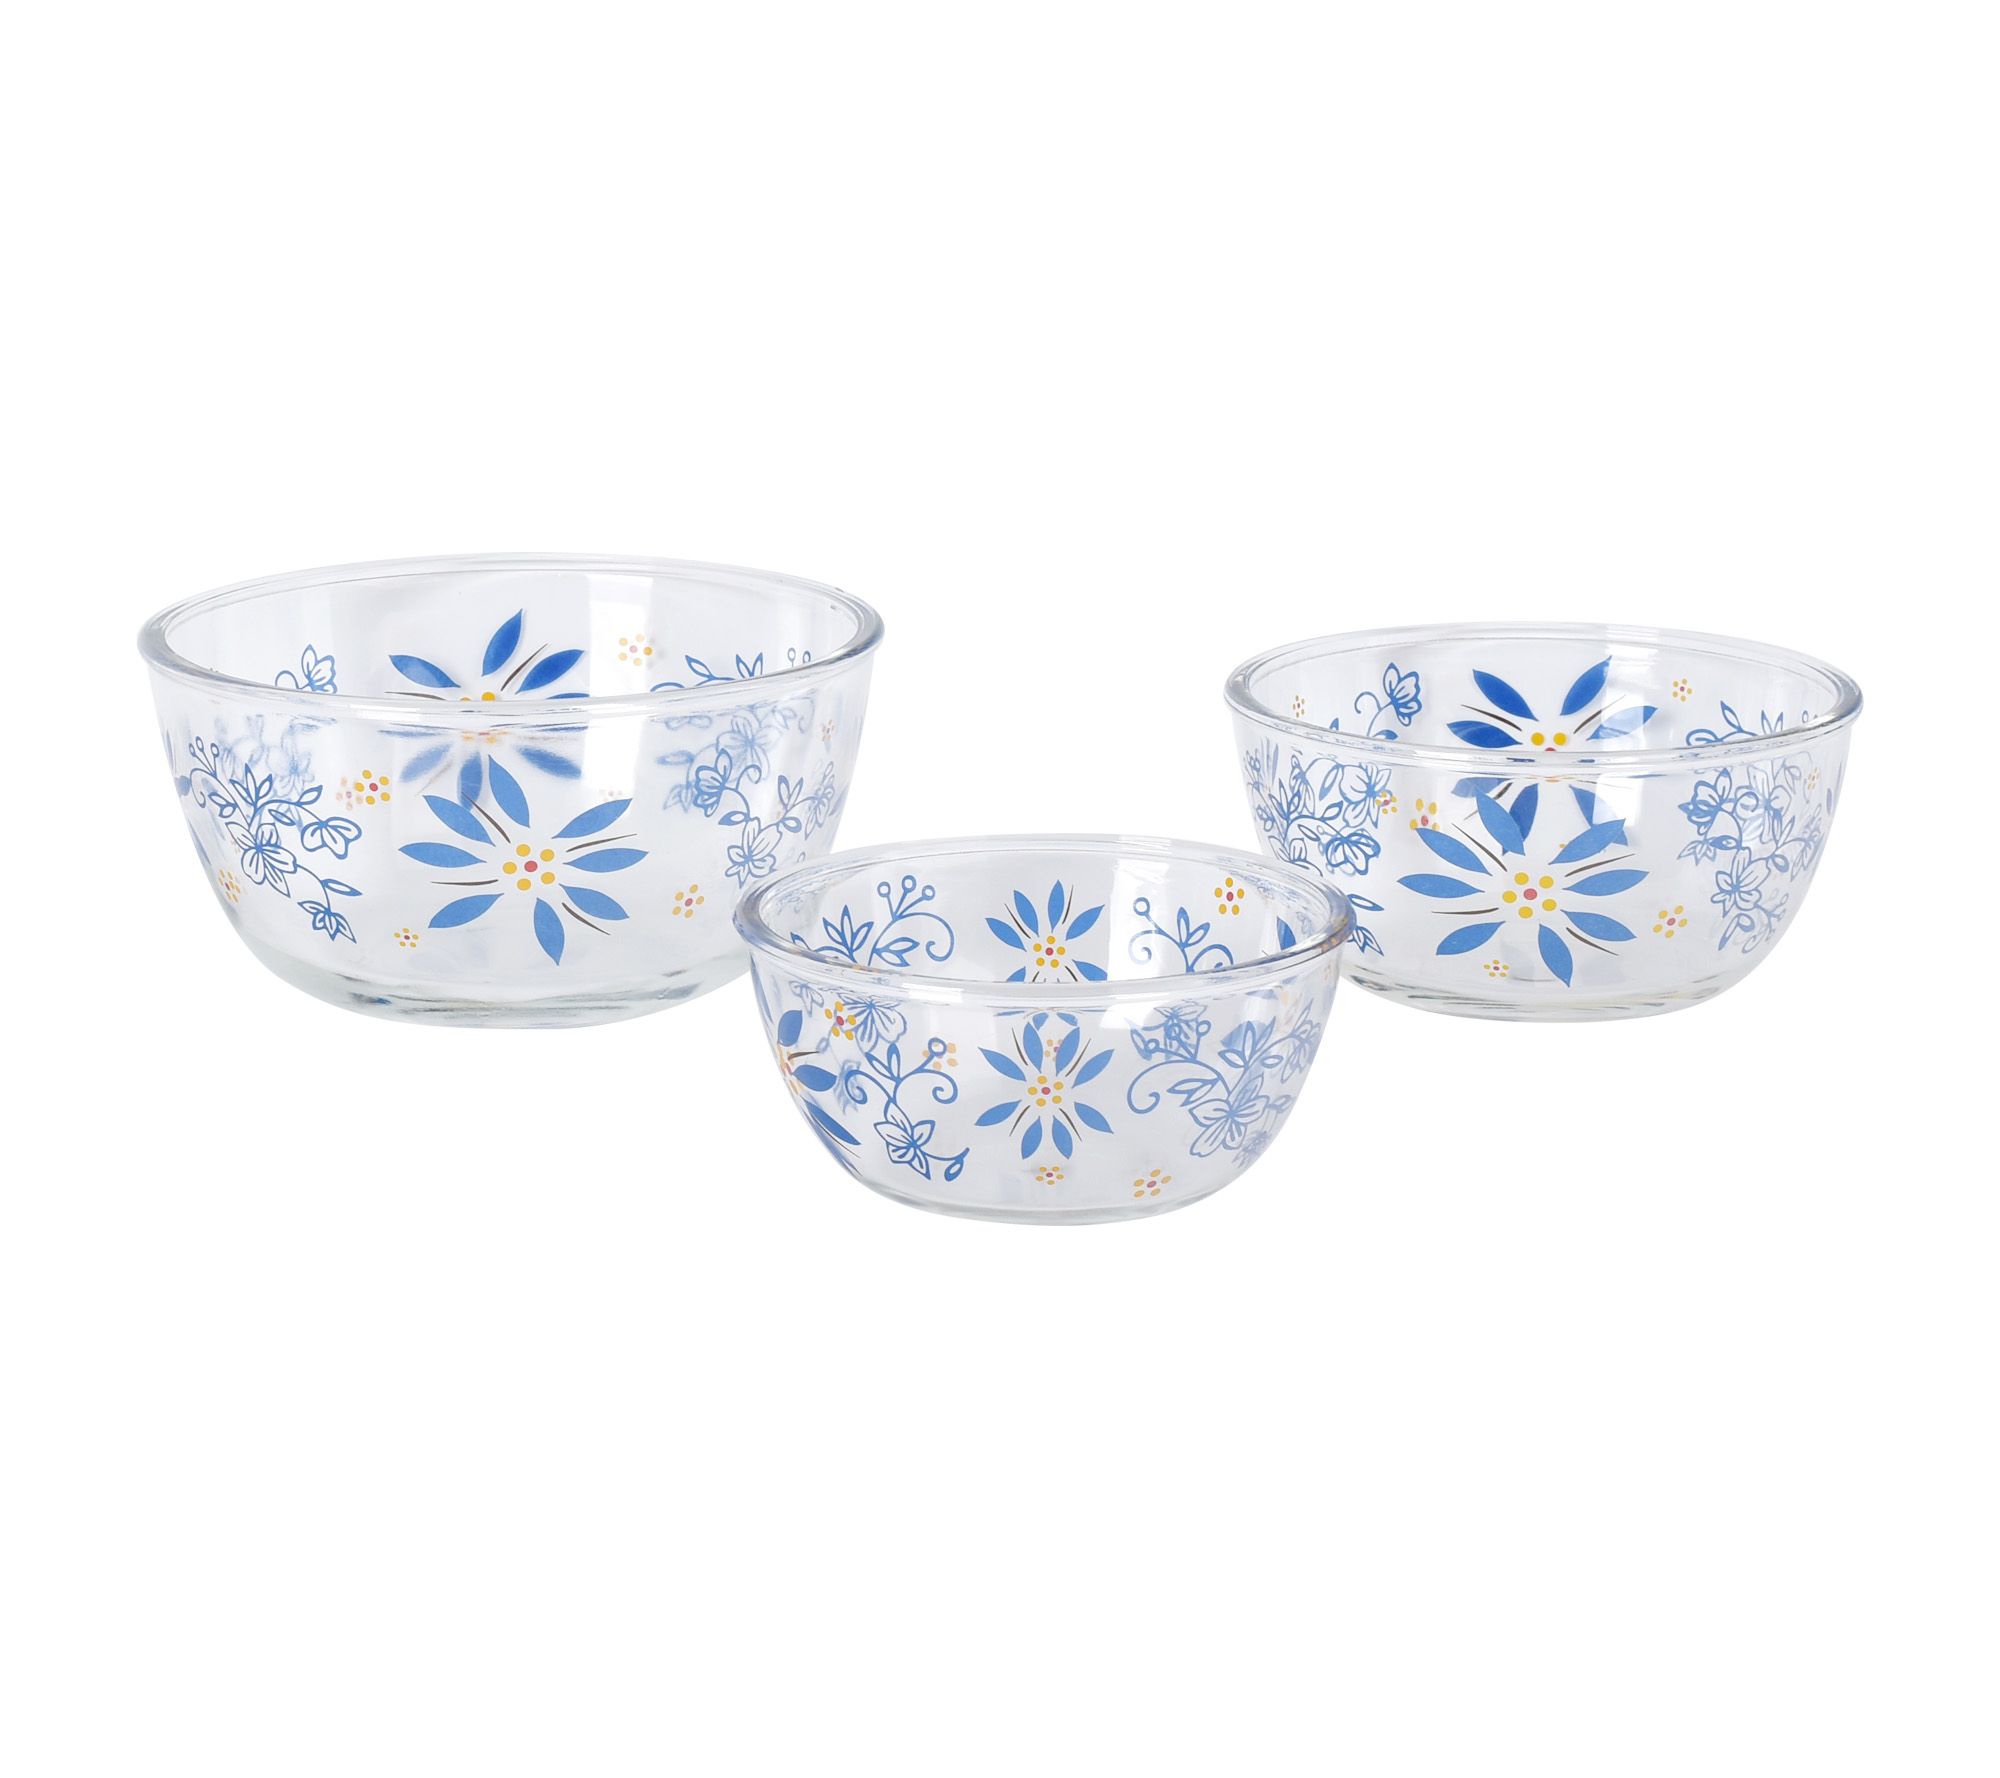 5 Pcs Nested Glass Mixing Bowls Set With Apple Design and Red Lids